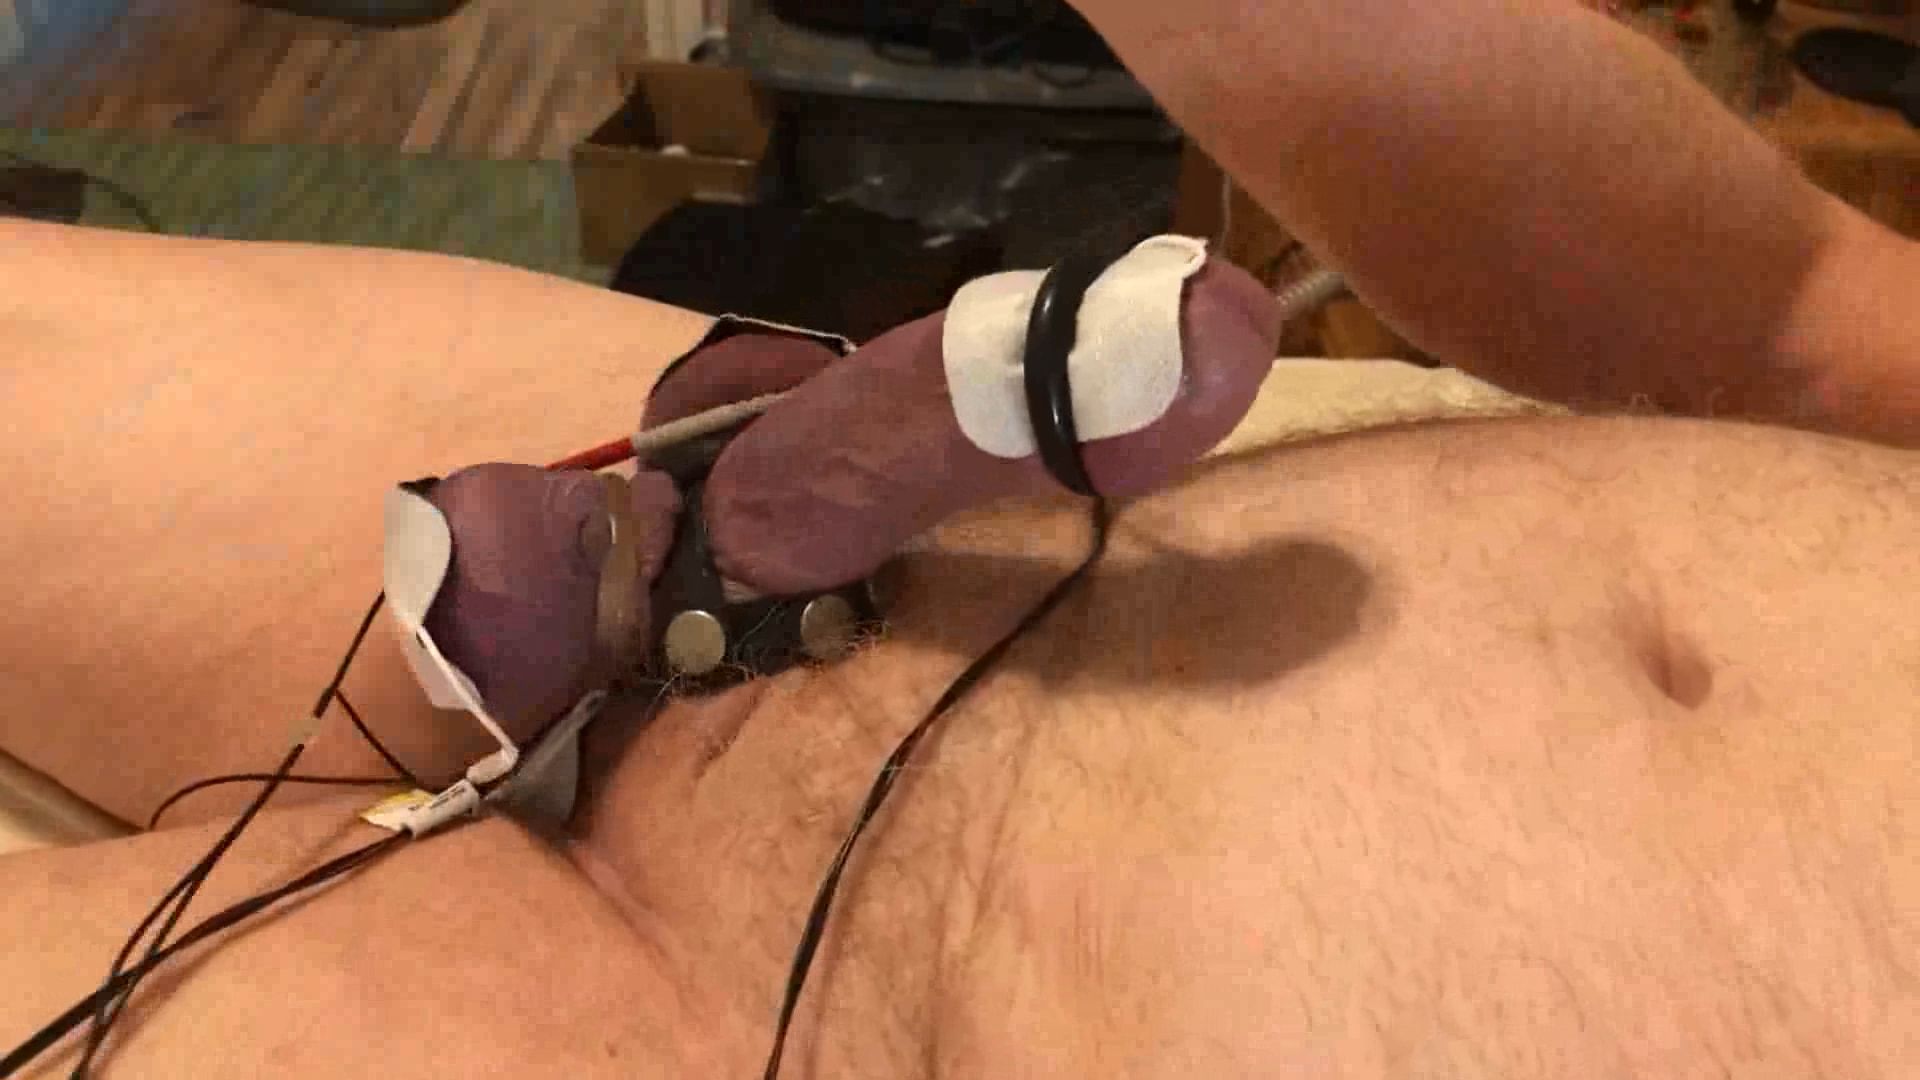 Cock twitches with estim pulse and precum flows as I slap an #28